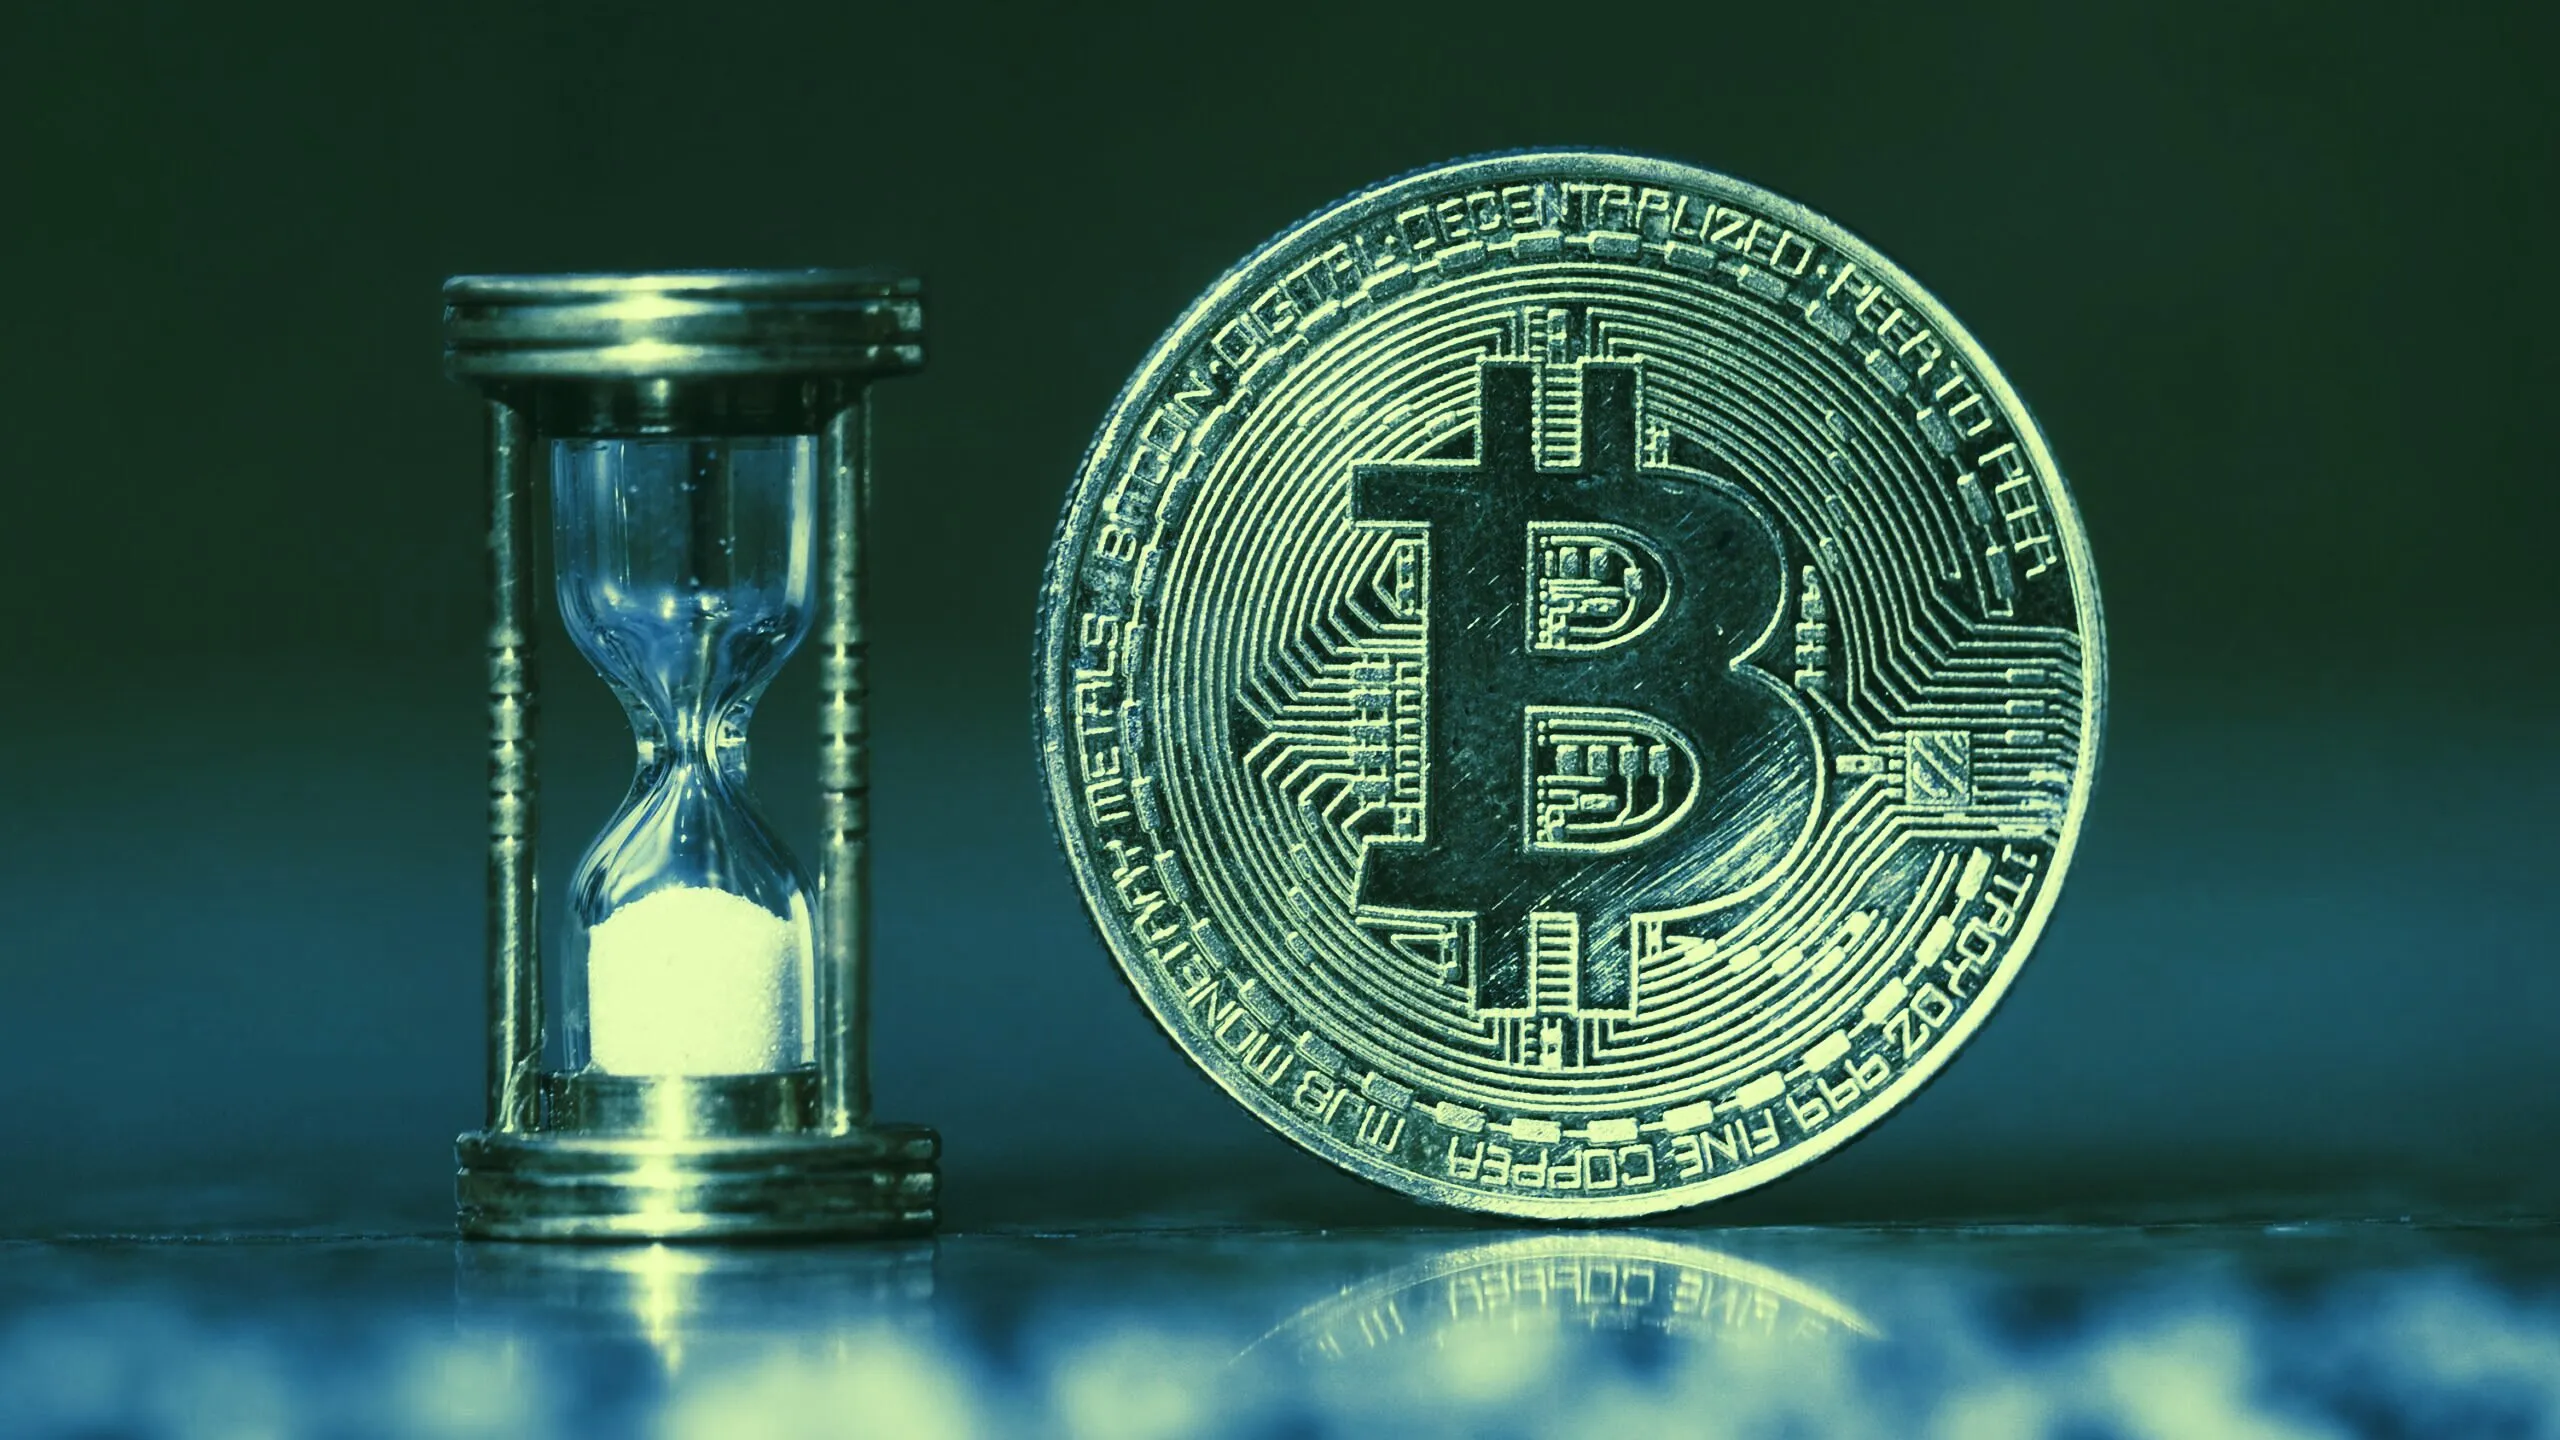 Bitcoin's advocates believe this is the moment for it to shine. (Source: Shutterstock)